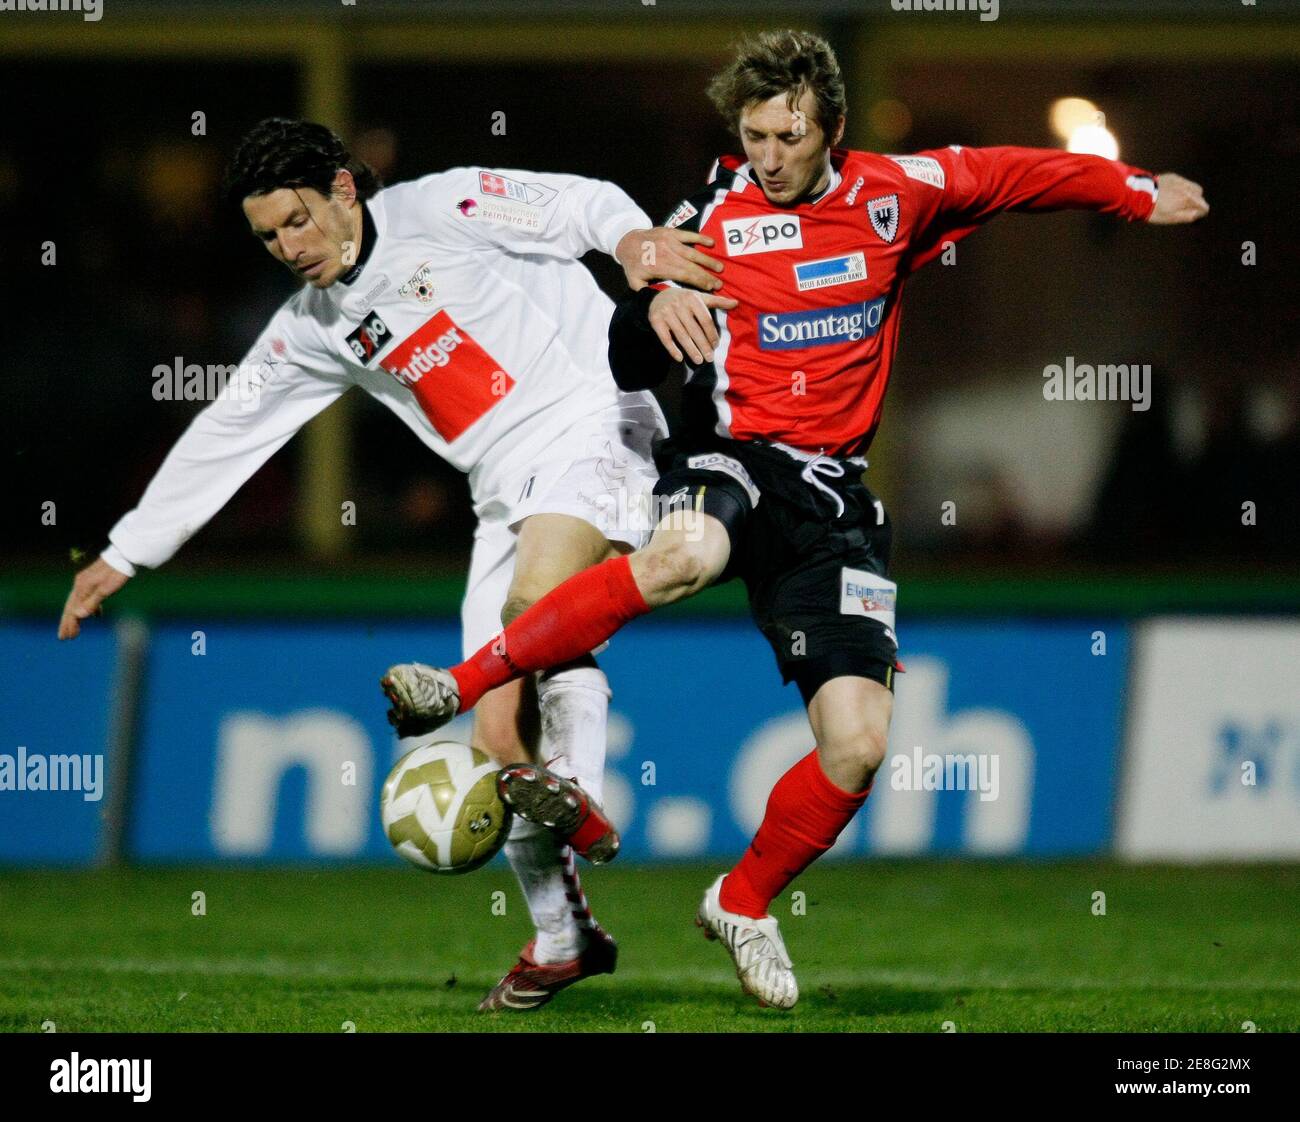 FC Thun's Andreas Gerber (L) challenges FC Aarau's Kristian Nushi during their Swiss Super League soccer match in Thun March 19, 2008. REUTERS/Pascal Lauener (SWITZERLAND) Stock Photo